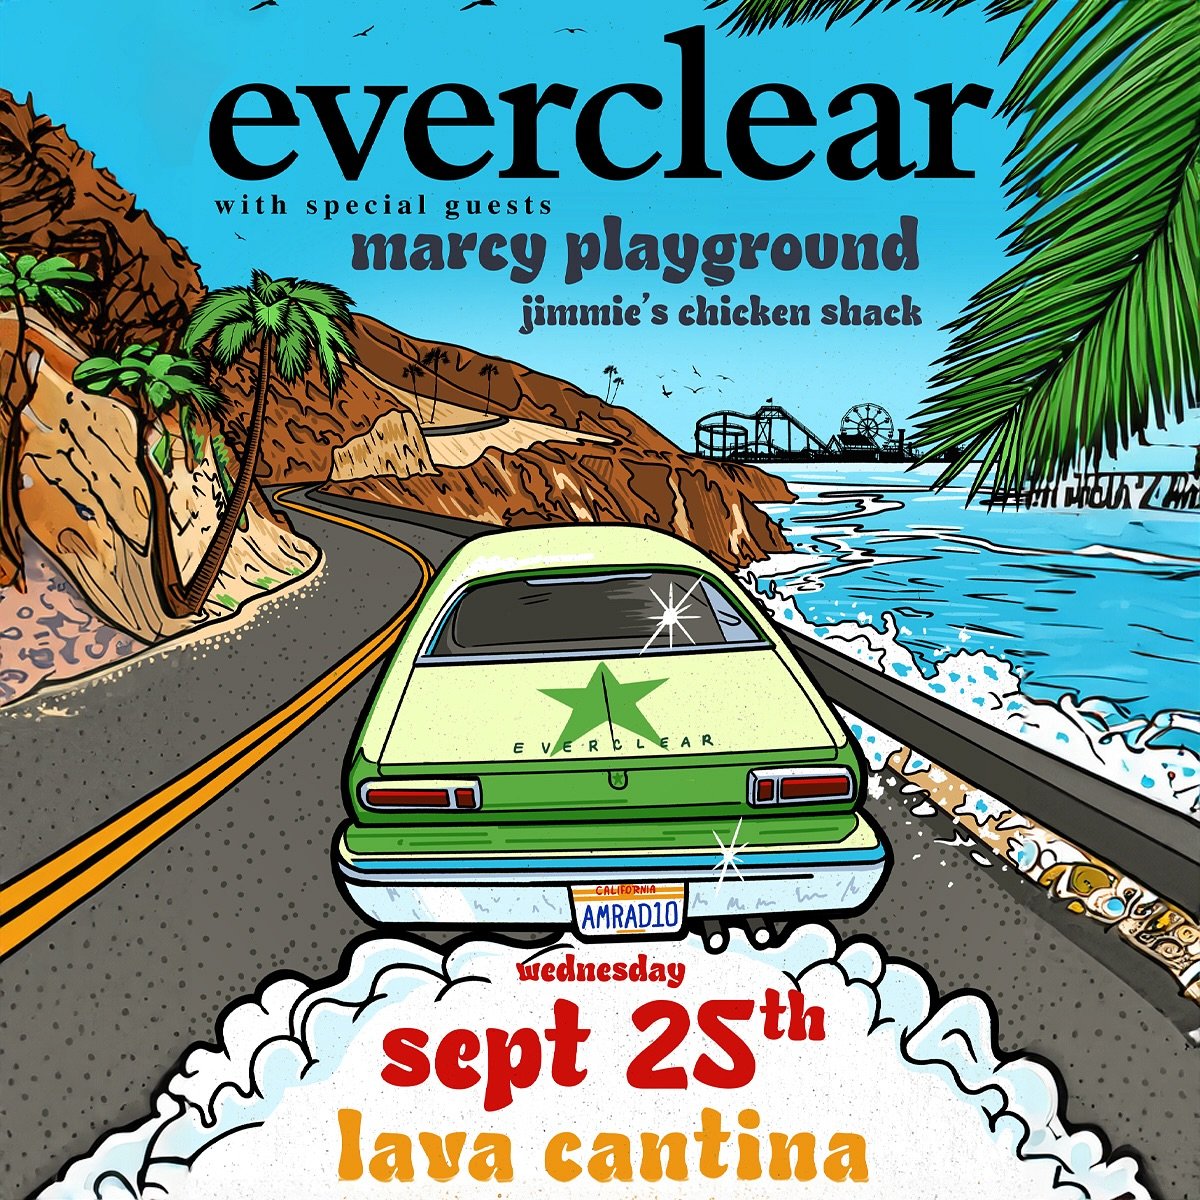 🚨 JUST ANNOUNCED! Everclear with Marcy Playground &amp; Jimmie&rsquo;s Chicken Shack - September 25th @lavacantinatc 🚨

***PRE-SALE FOR ALL LAVA CANTINA VIP PLATINUM AND BLACK CARD MEMBERS BEGINS 4/25 AT 10 AM***

***TICKETS ON SALE 4/26 AT 10 AM**